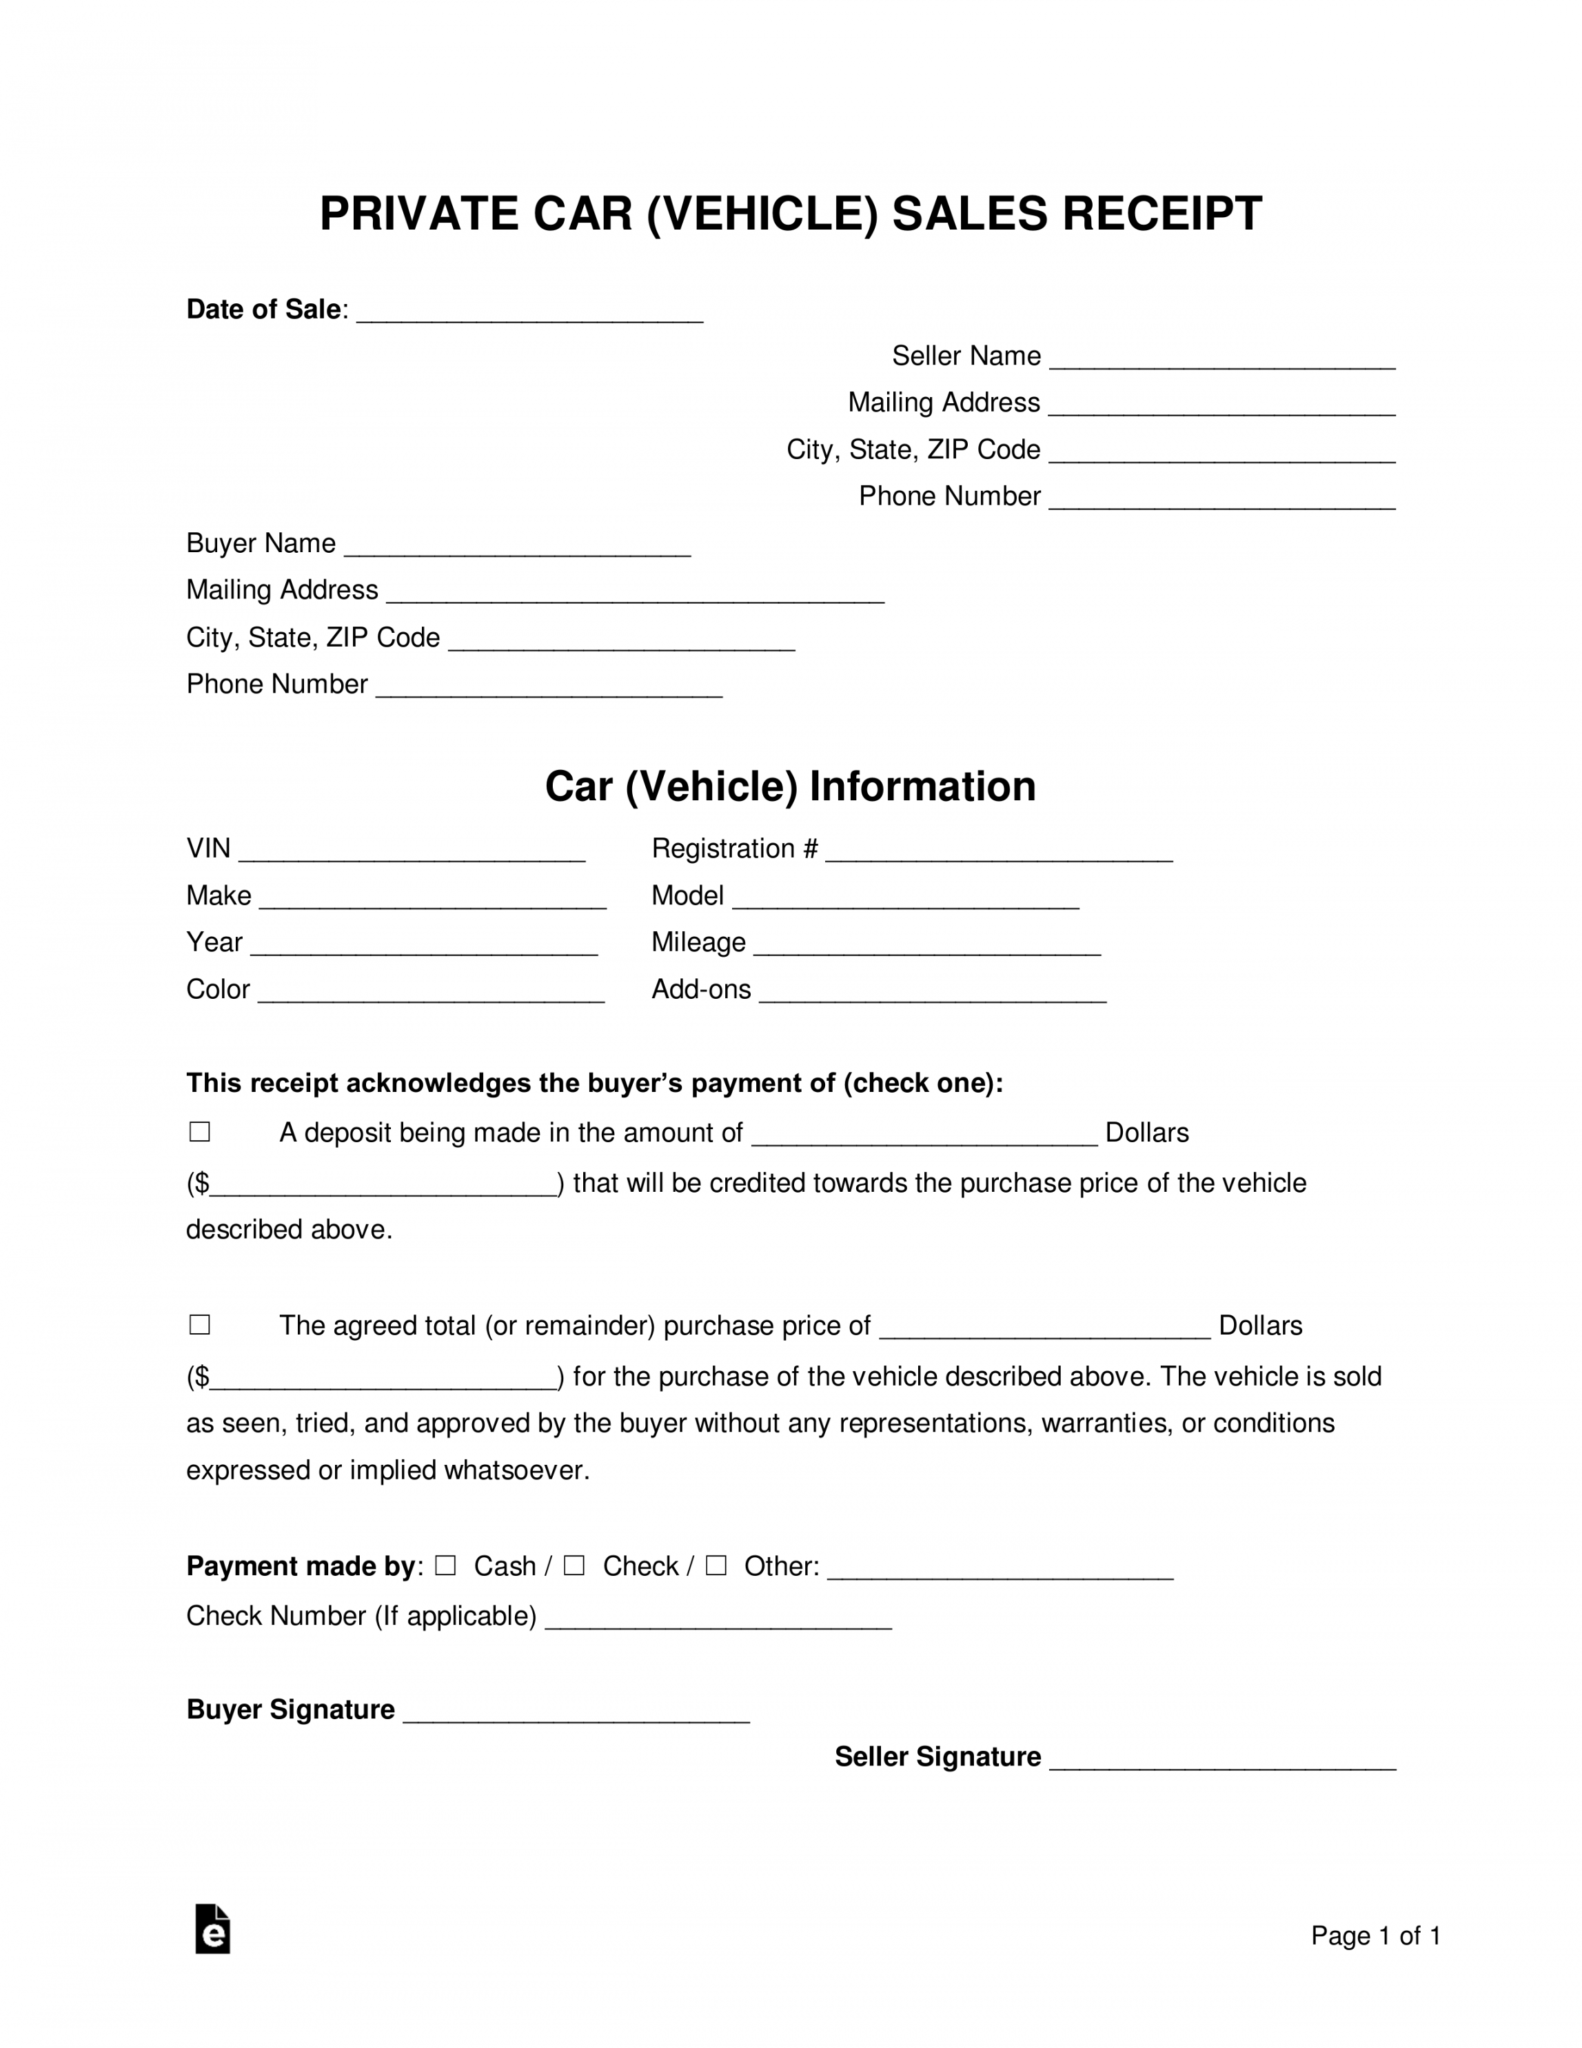 Private Receipt Template For The Sale Of A Vehicle